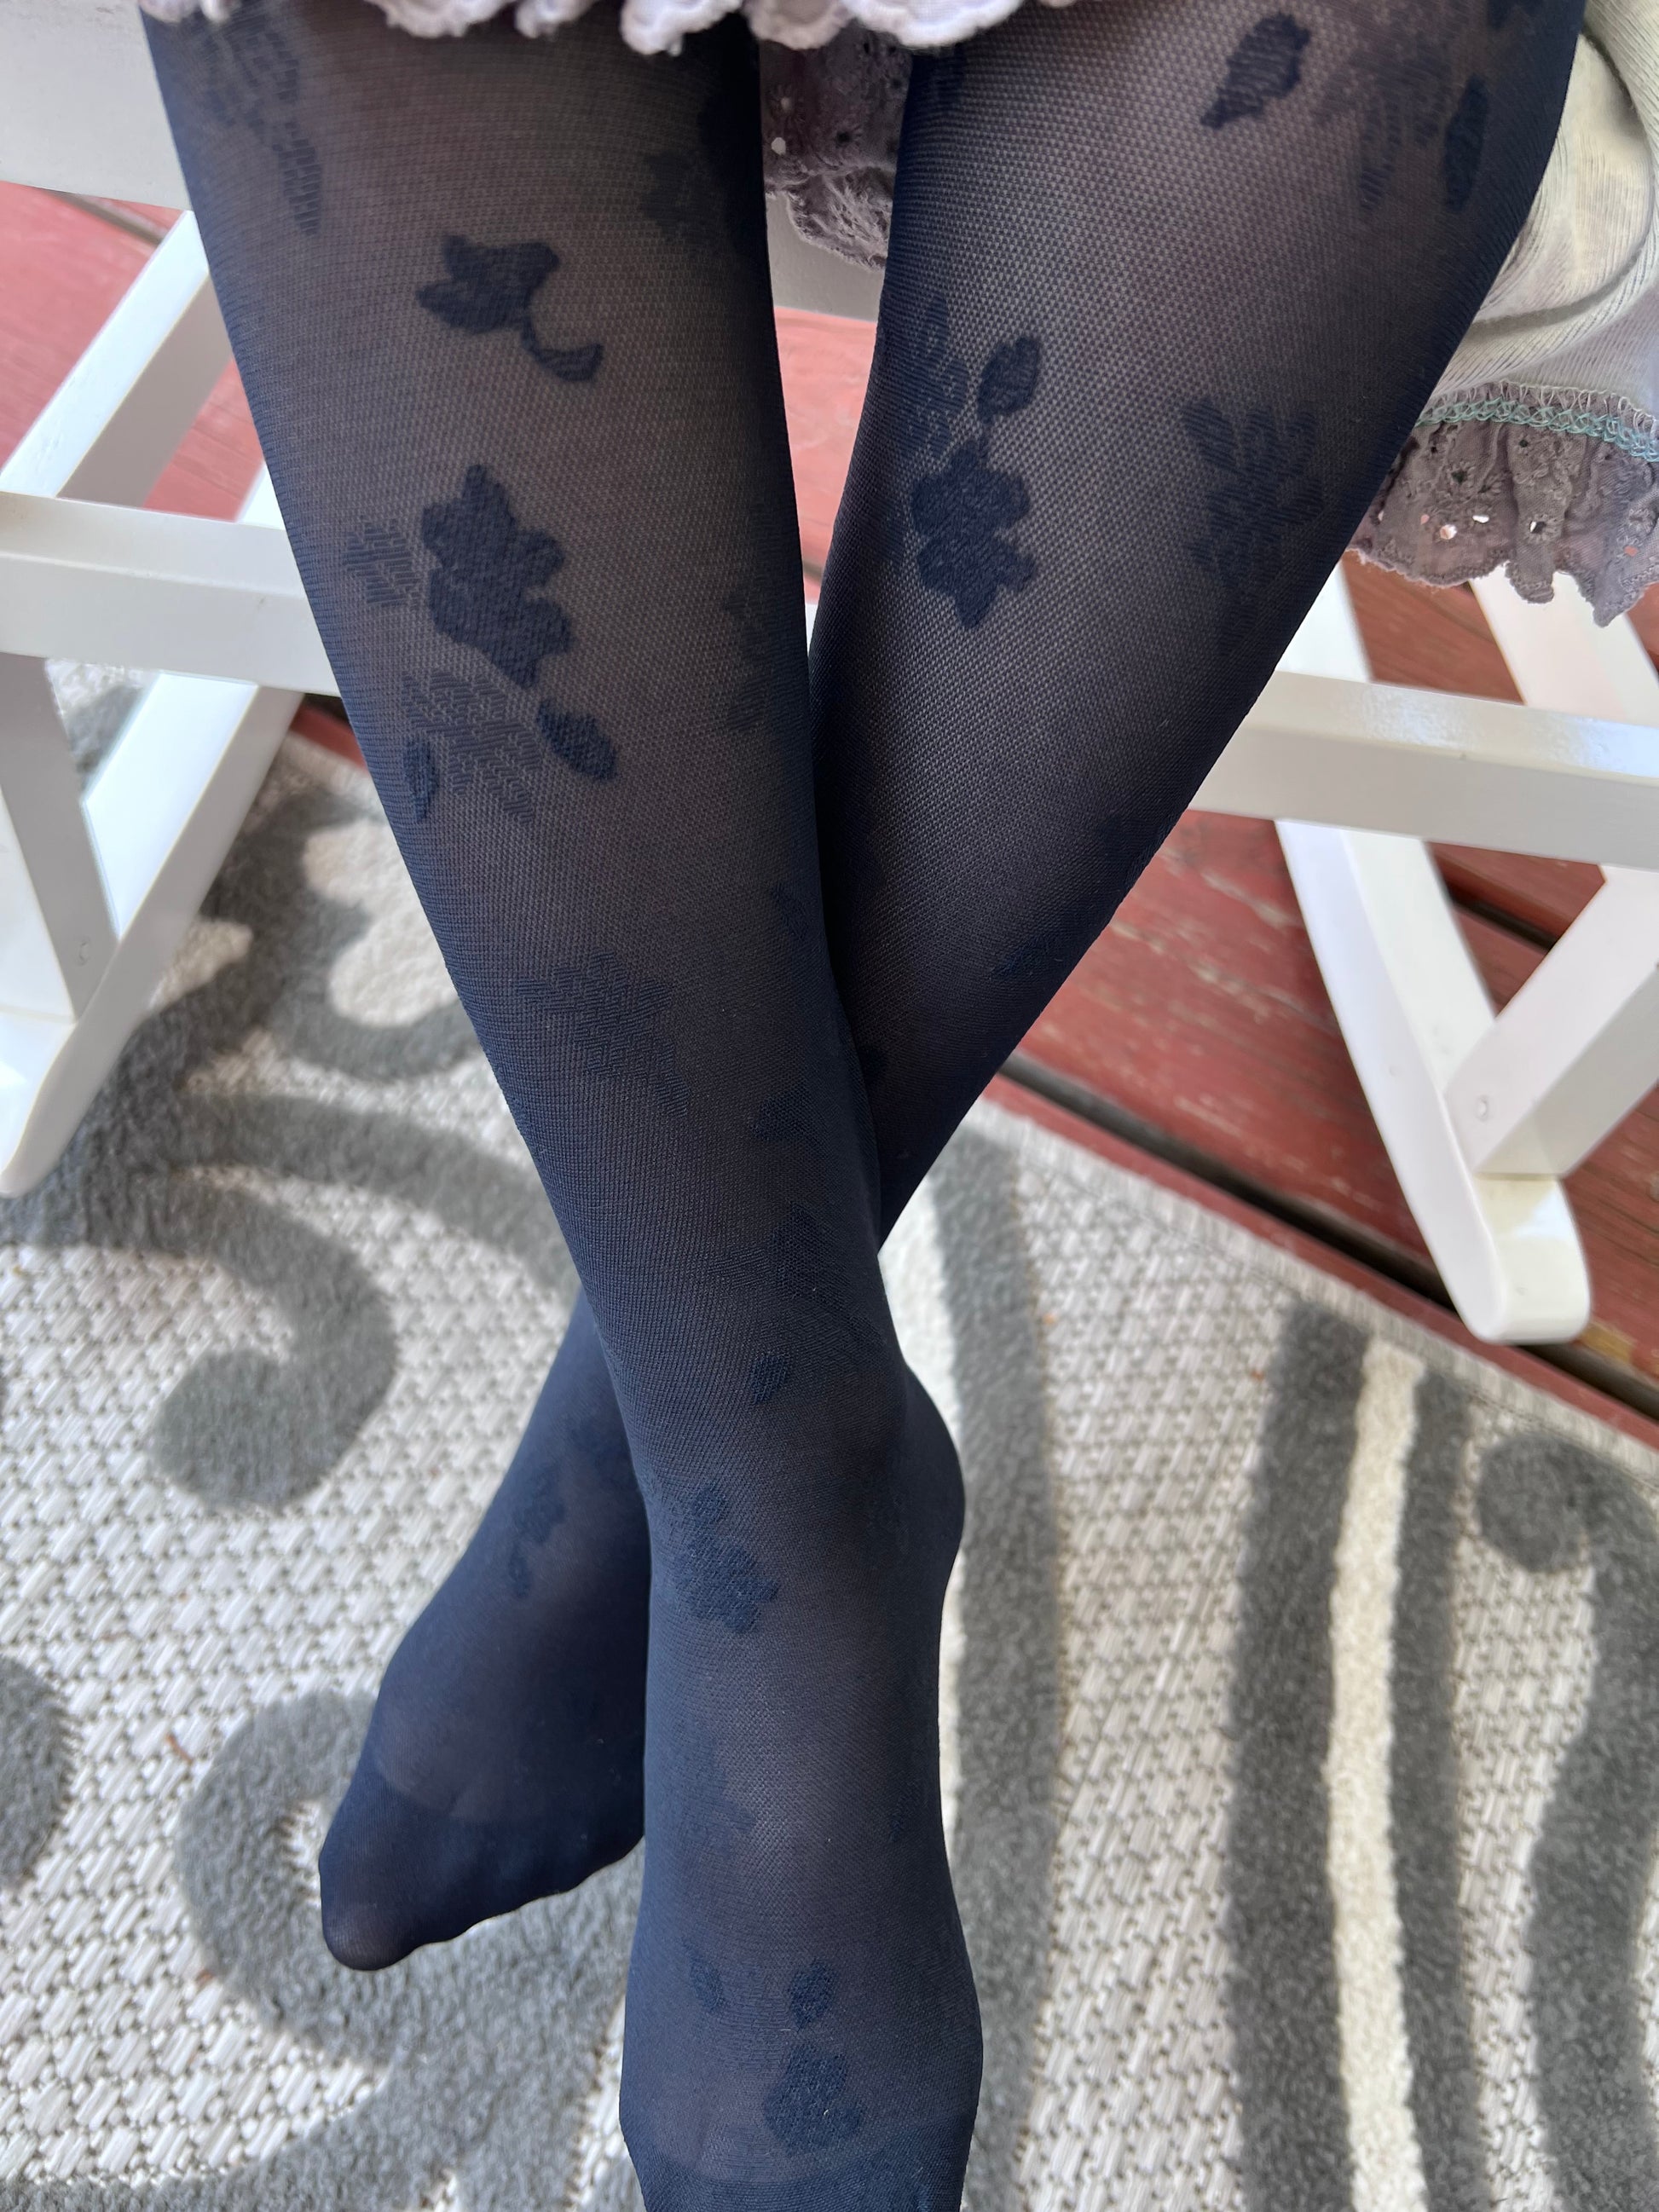 Floral Lace Tights – Cupcake Zoo Fashion